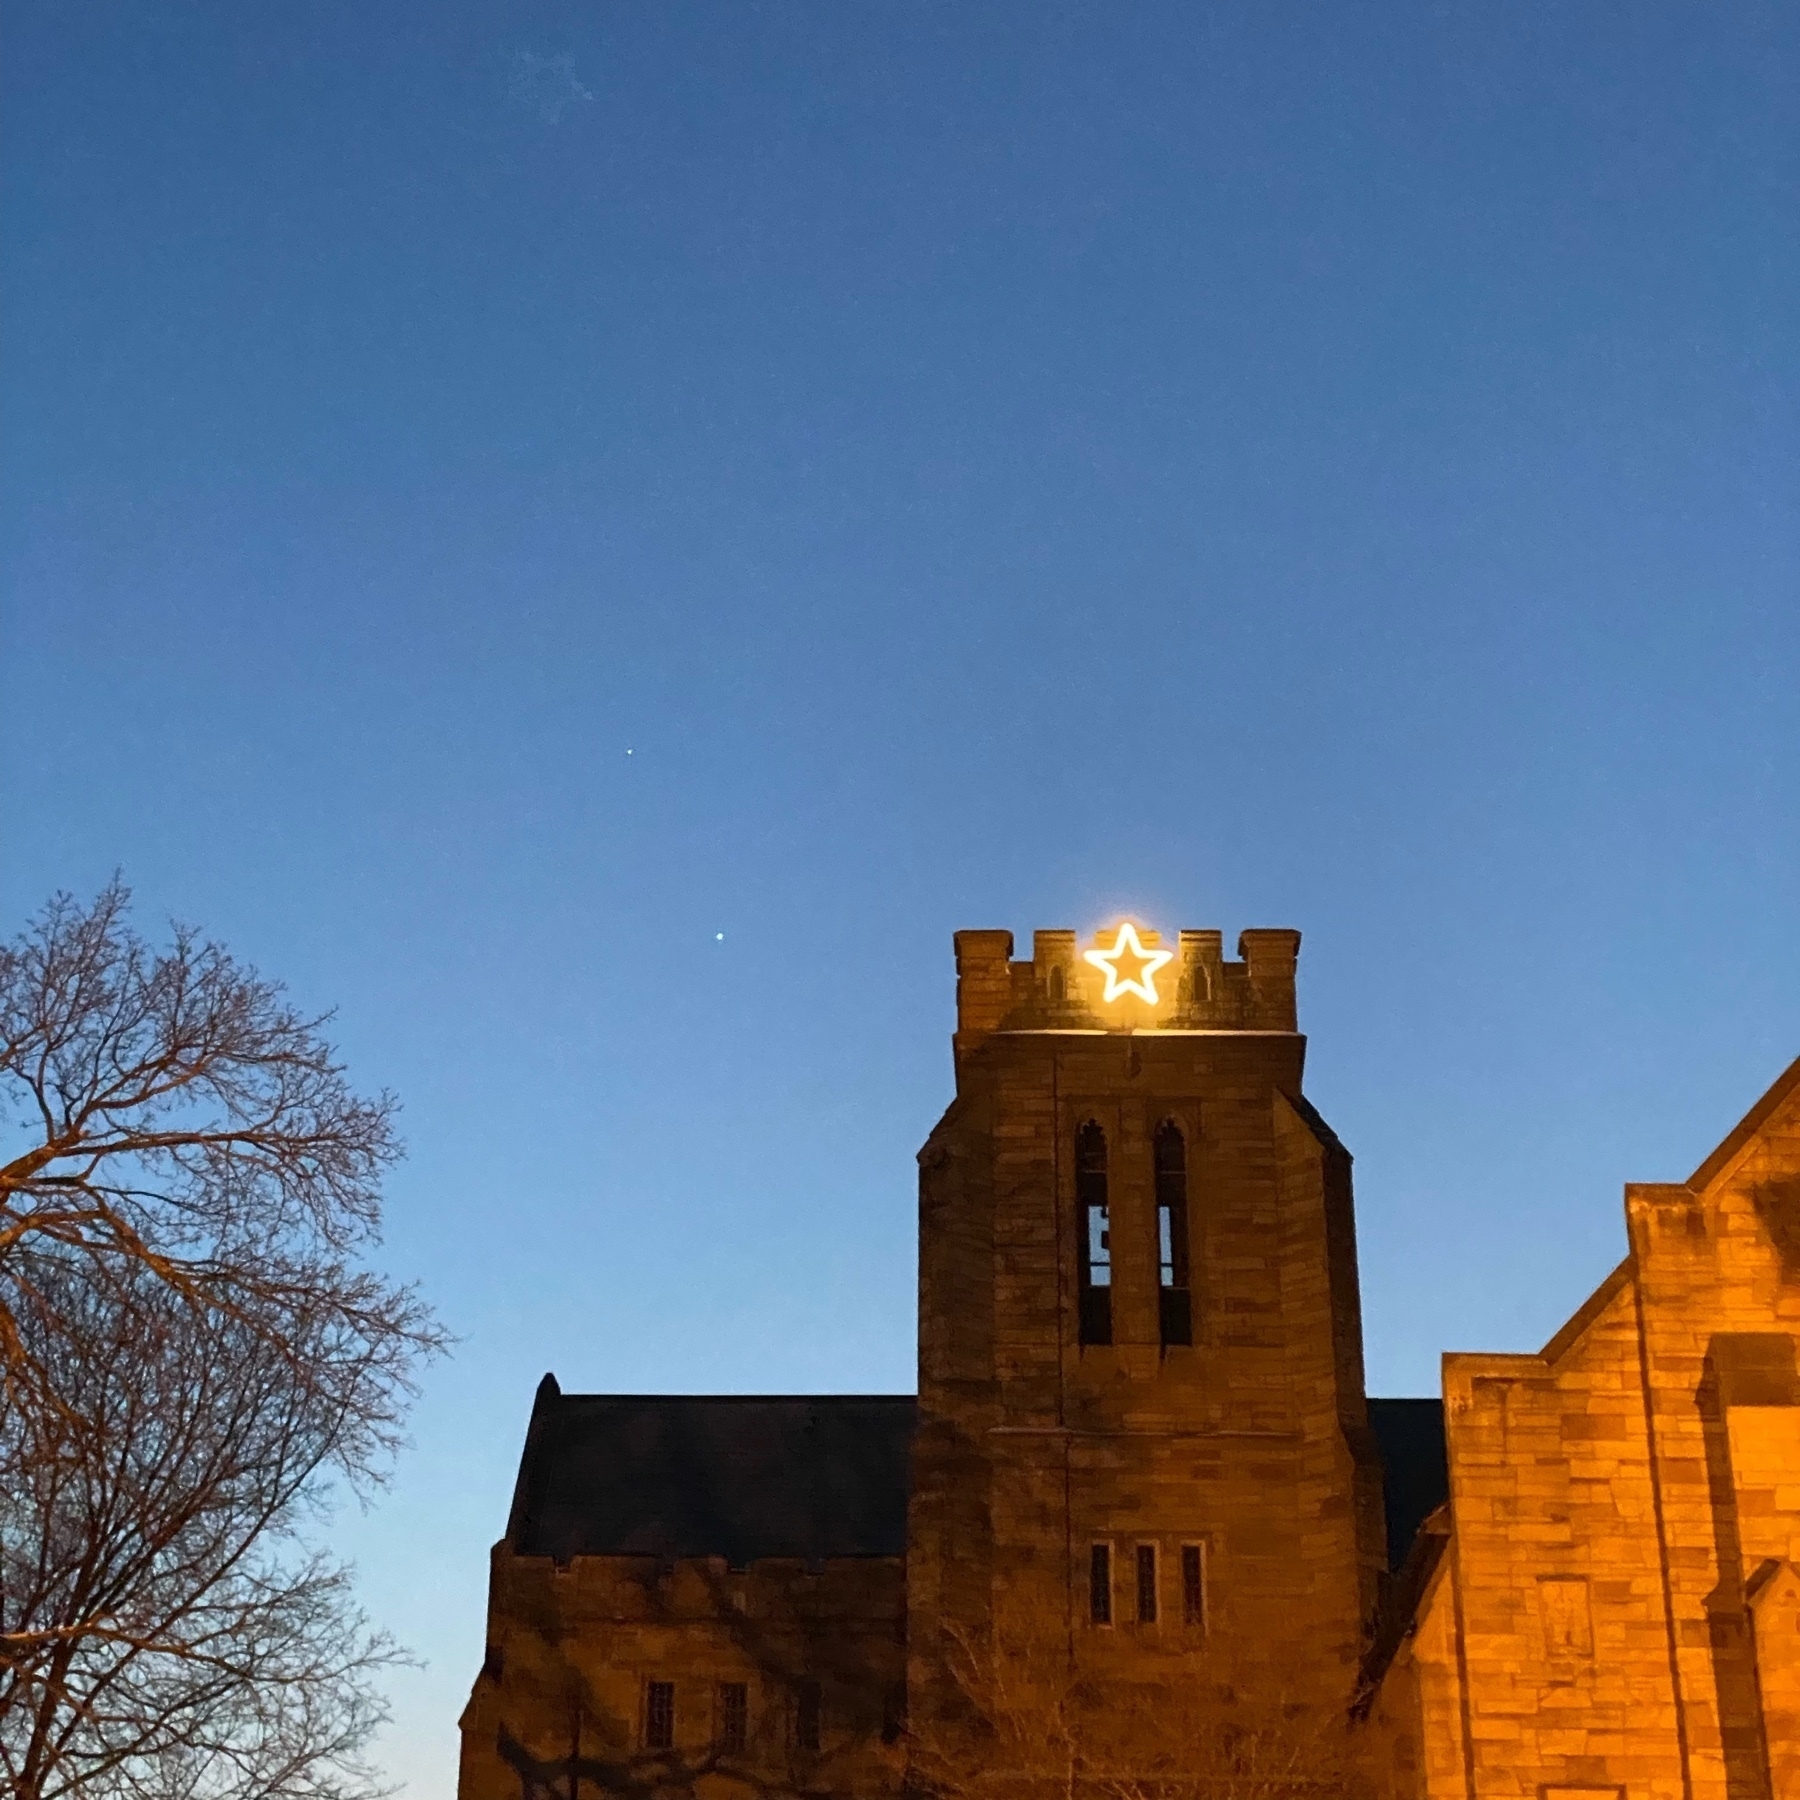 View of a church tower shortly after sunset, with a five pointed illuminated star on the tower and Venus and Jupiter just to the left in the dark blue sky.